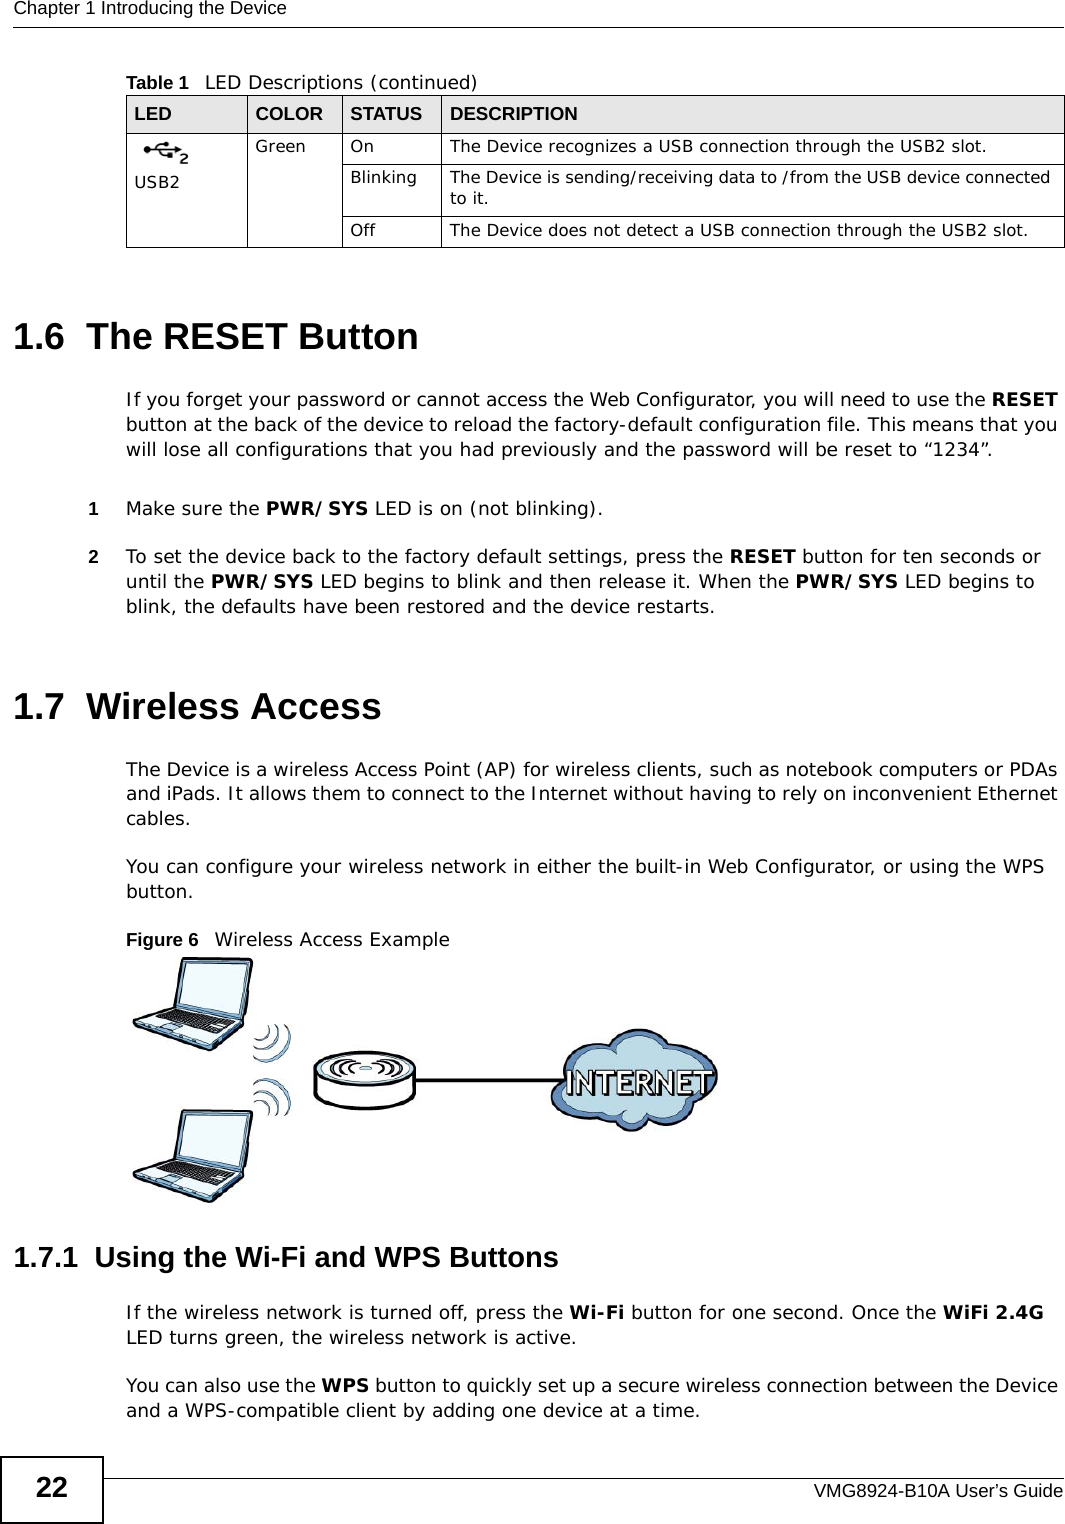 Chapter 1 Introducing the DeviceVMG8924-B10A User’s Guide221.6  The RESET ButtonIf you forget your password or cannot access the Web Configurator, you will need to use the RESET button at the back of the device to reload the factory-default configuration file. This means that you will lose all configurations that you had previously and the password will be reset to “1234”. 1Make sure the PWR/SYS LED is on (not blinking).2To set the device back to the factory default settings, press the RESET button for ten seconds or until the PWR/SYS LED begins to blink and then release it. When the PWR/SYS LED begins to blink, the defaults have been restored and the device restarts.1.7  Wireless AccessThe Device is a wireless Access Point (AP) for wireless clients, such as notebook computers or PDAs and iPads. It allows them to connect to the Internet without having to rely on inconvenient Ethernet cables.You can configure your wireless network in either the built-in Web Configurator, or using the WPS button.Figure 6   Wireless Access Example1.7.1  Using the Wi-Fi and WPS ButtonsIf the wireless network is turned off, press the Wi-Fi button for one second. Once the WiFi 2.4G LED turns green, the wireless network is active.You can also use the WPS button to quickly set up a secure wireless connection between the Device and a WPS-compatible client by adding one device at a time.USB2Green On The Device recognizes a USB connection through the USB2 slot.Blinking The Device is sending/receiving data to /from the USB device connected to it.Off The Device does not detect a USB connection through the USB2 slot.Table 1   LED Descriptions (continued)LED COLOR STATUS DESCRIPTION